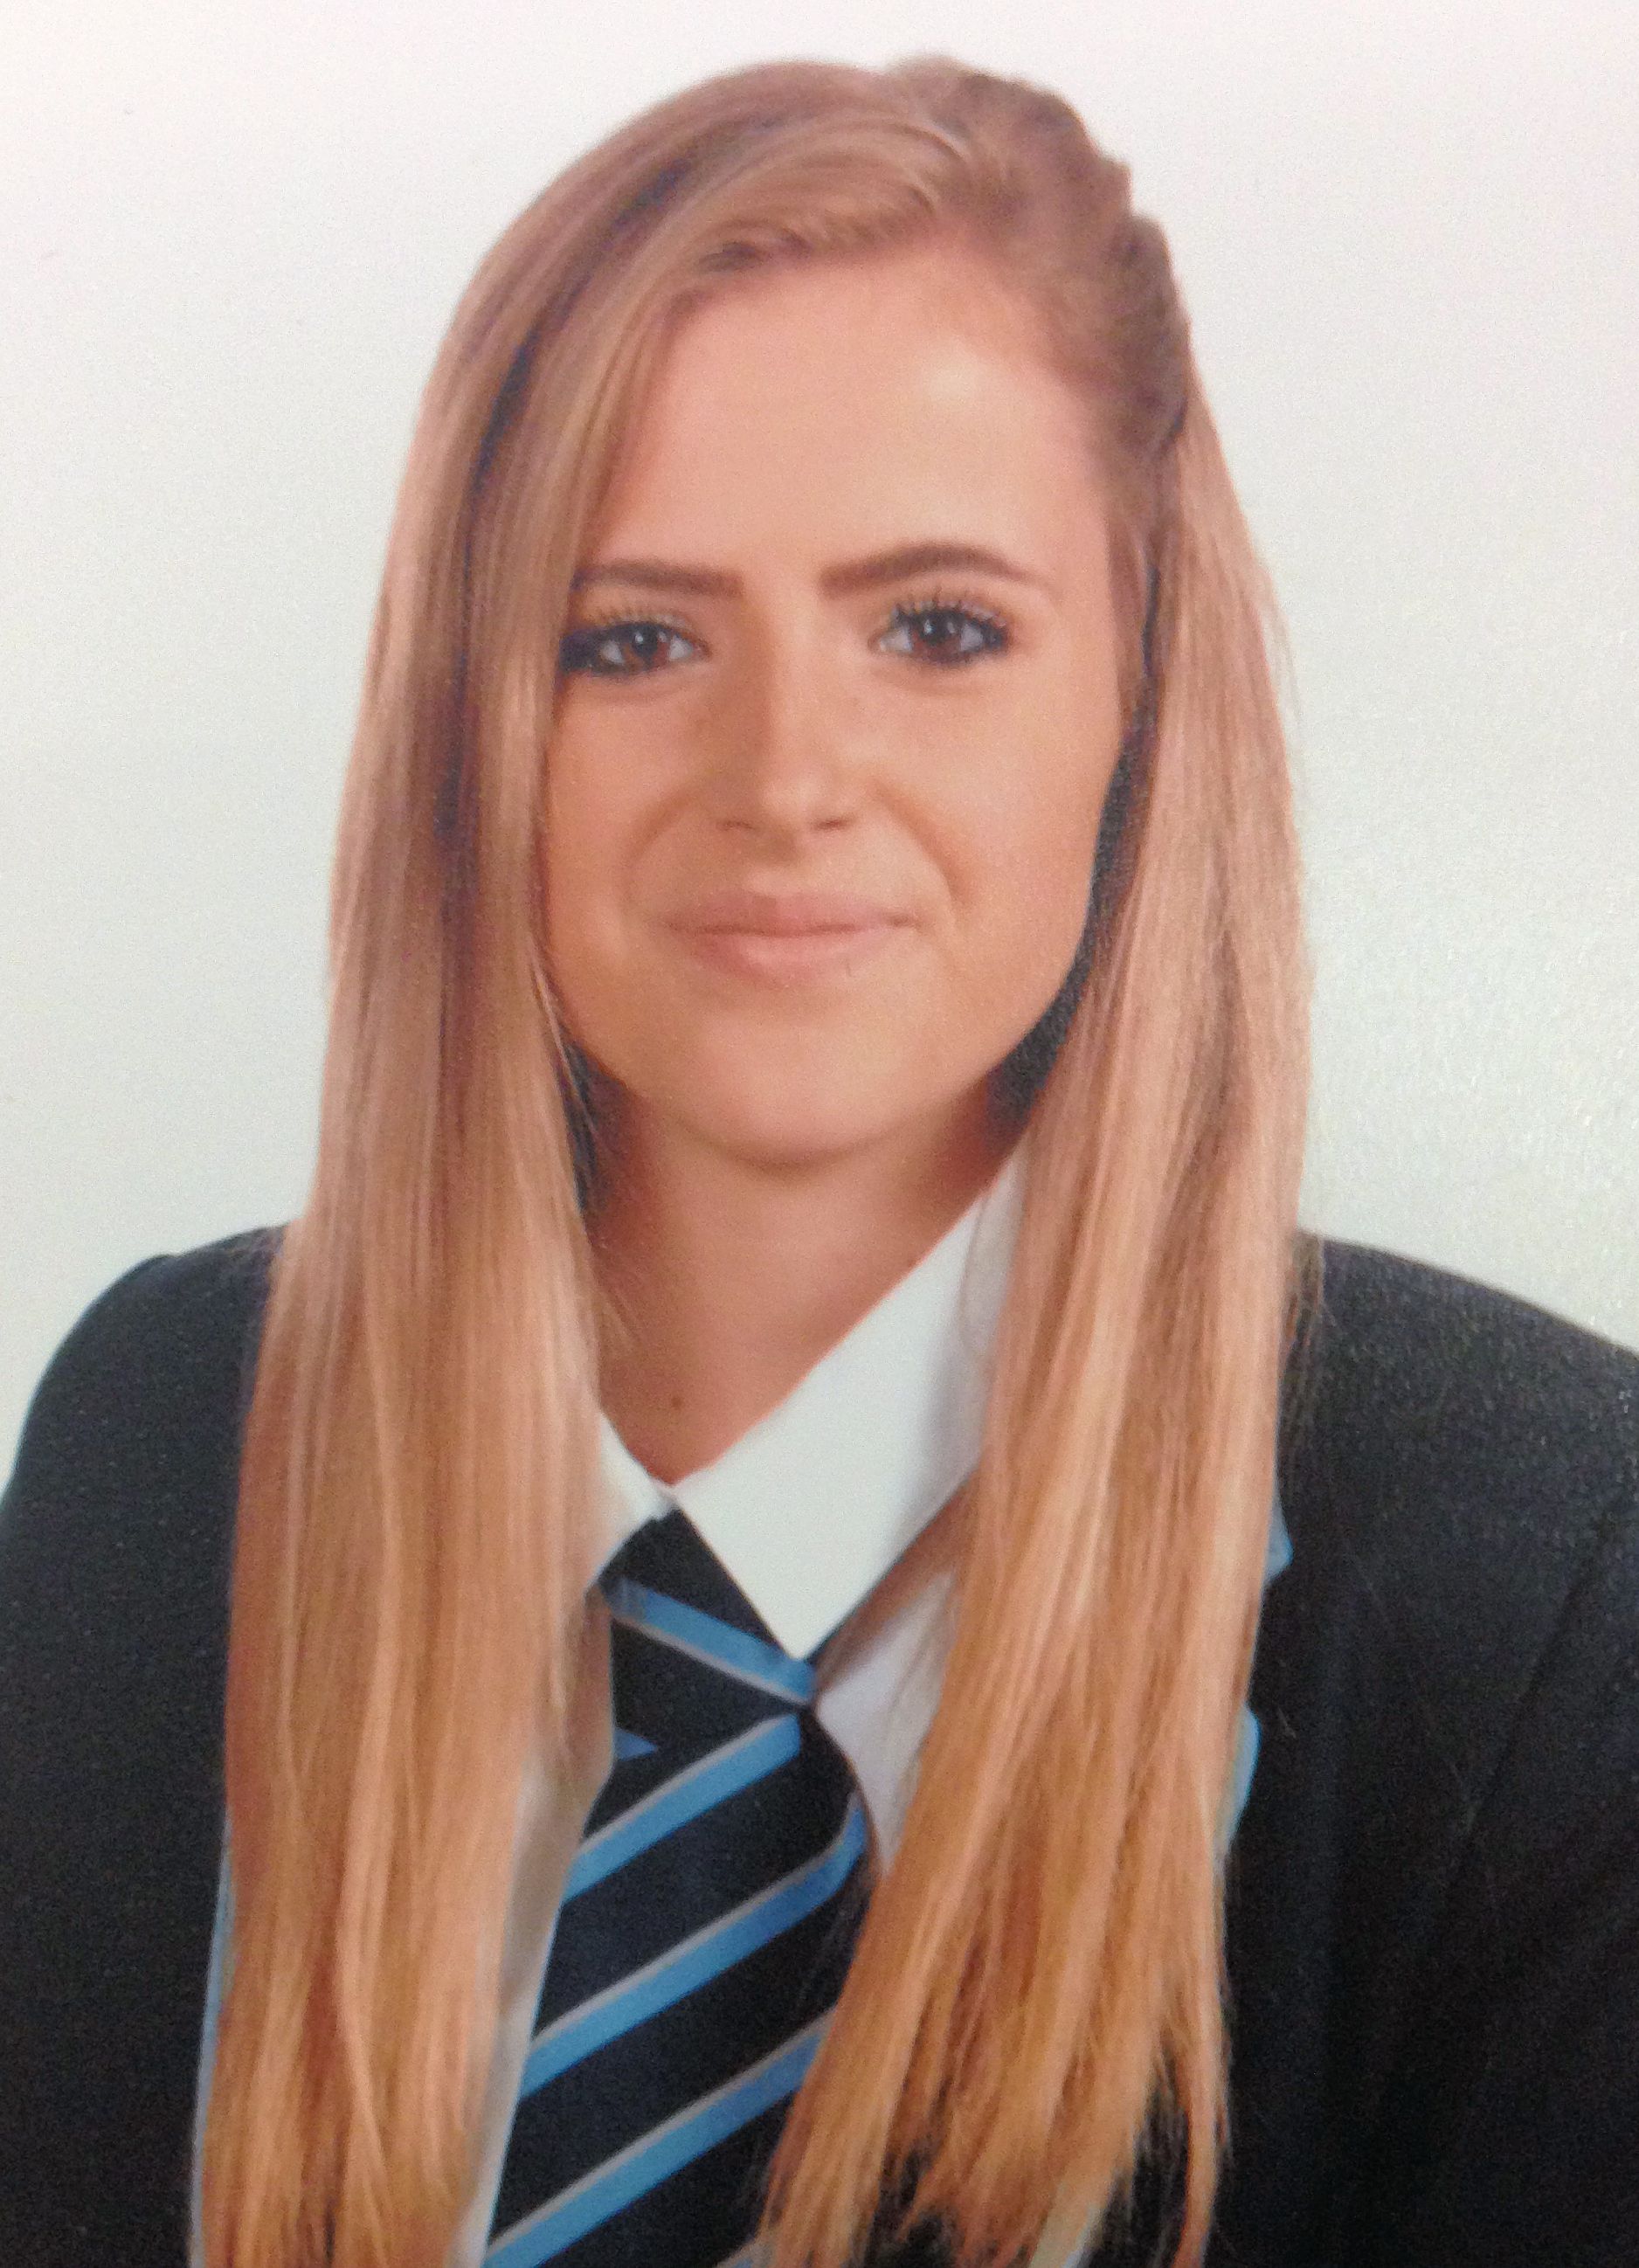 Teenager goes missing from home after going out with friends - 4275990